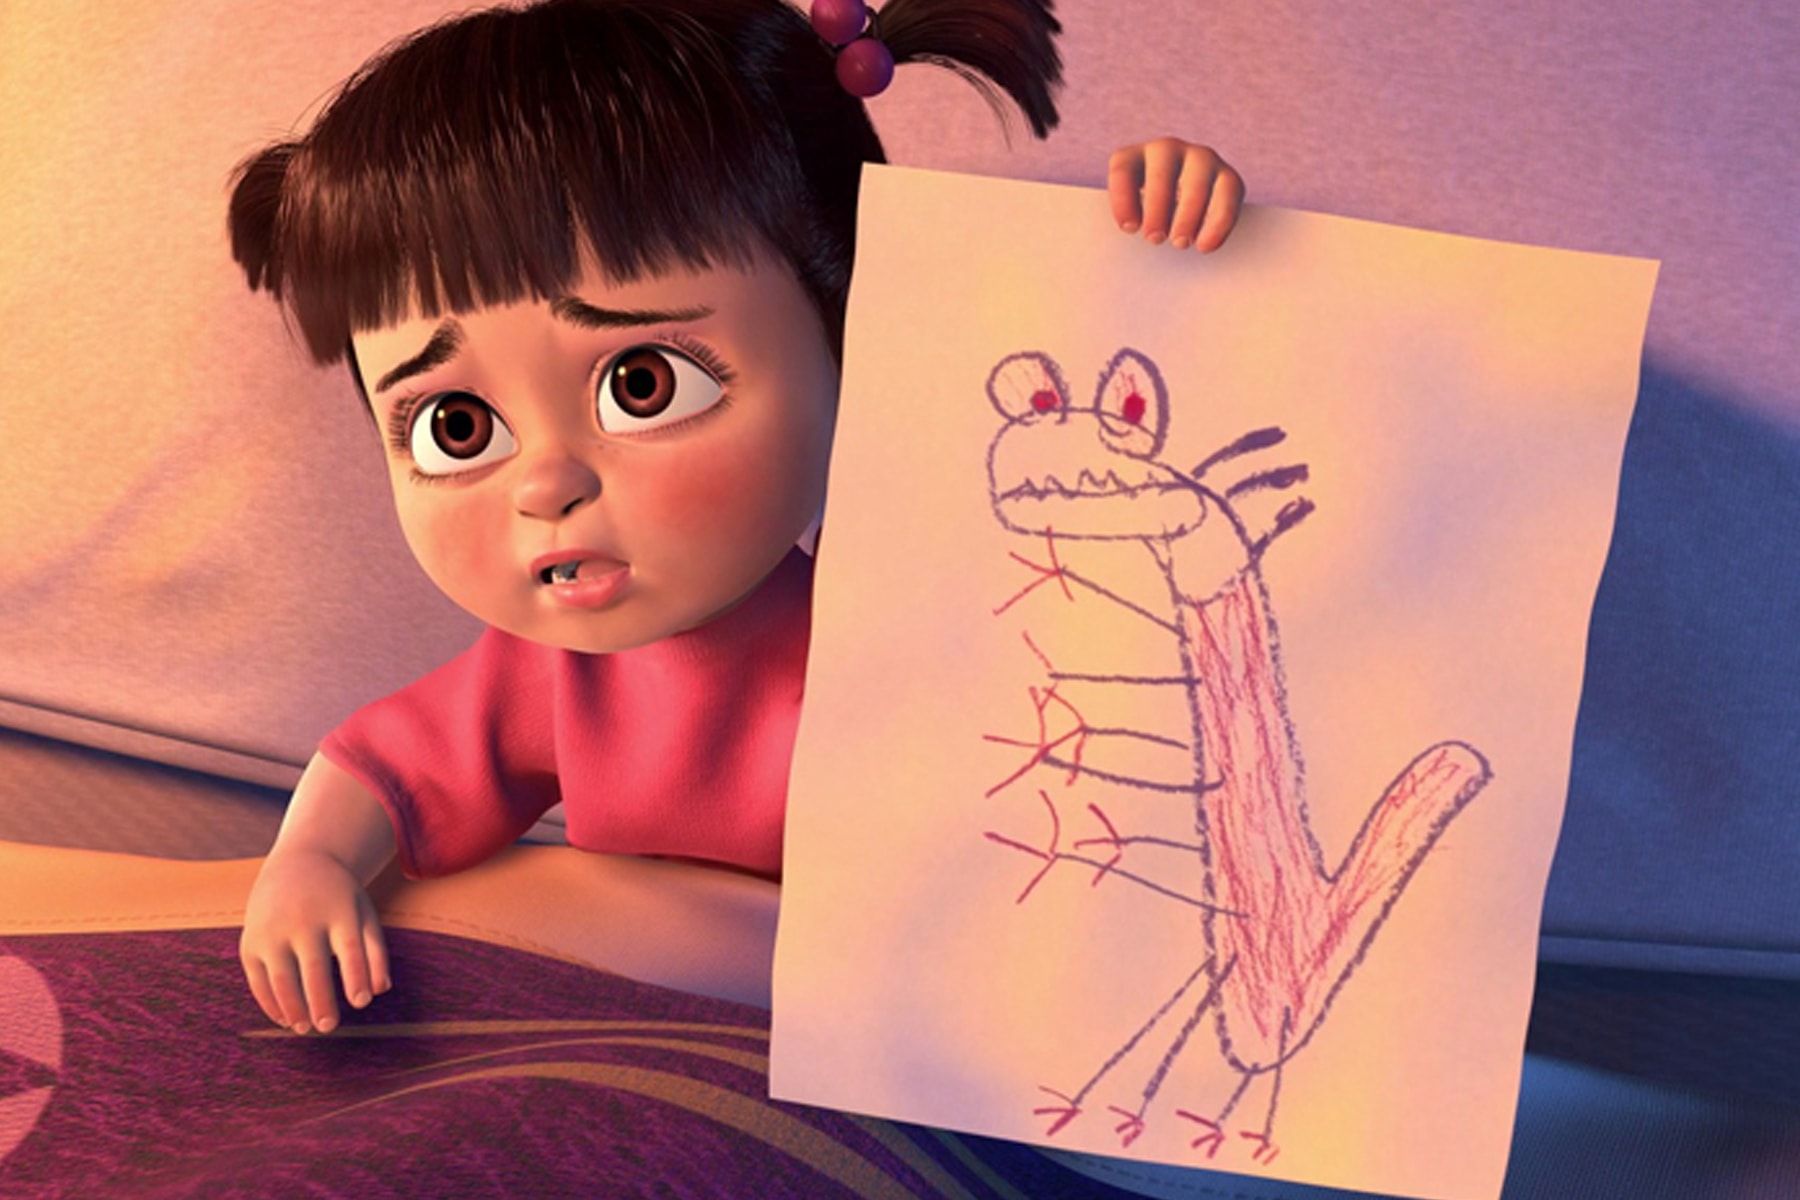 Screenshot of Boo in the animated film Monsters, Inc